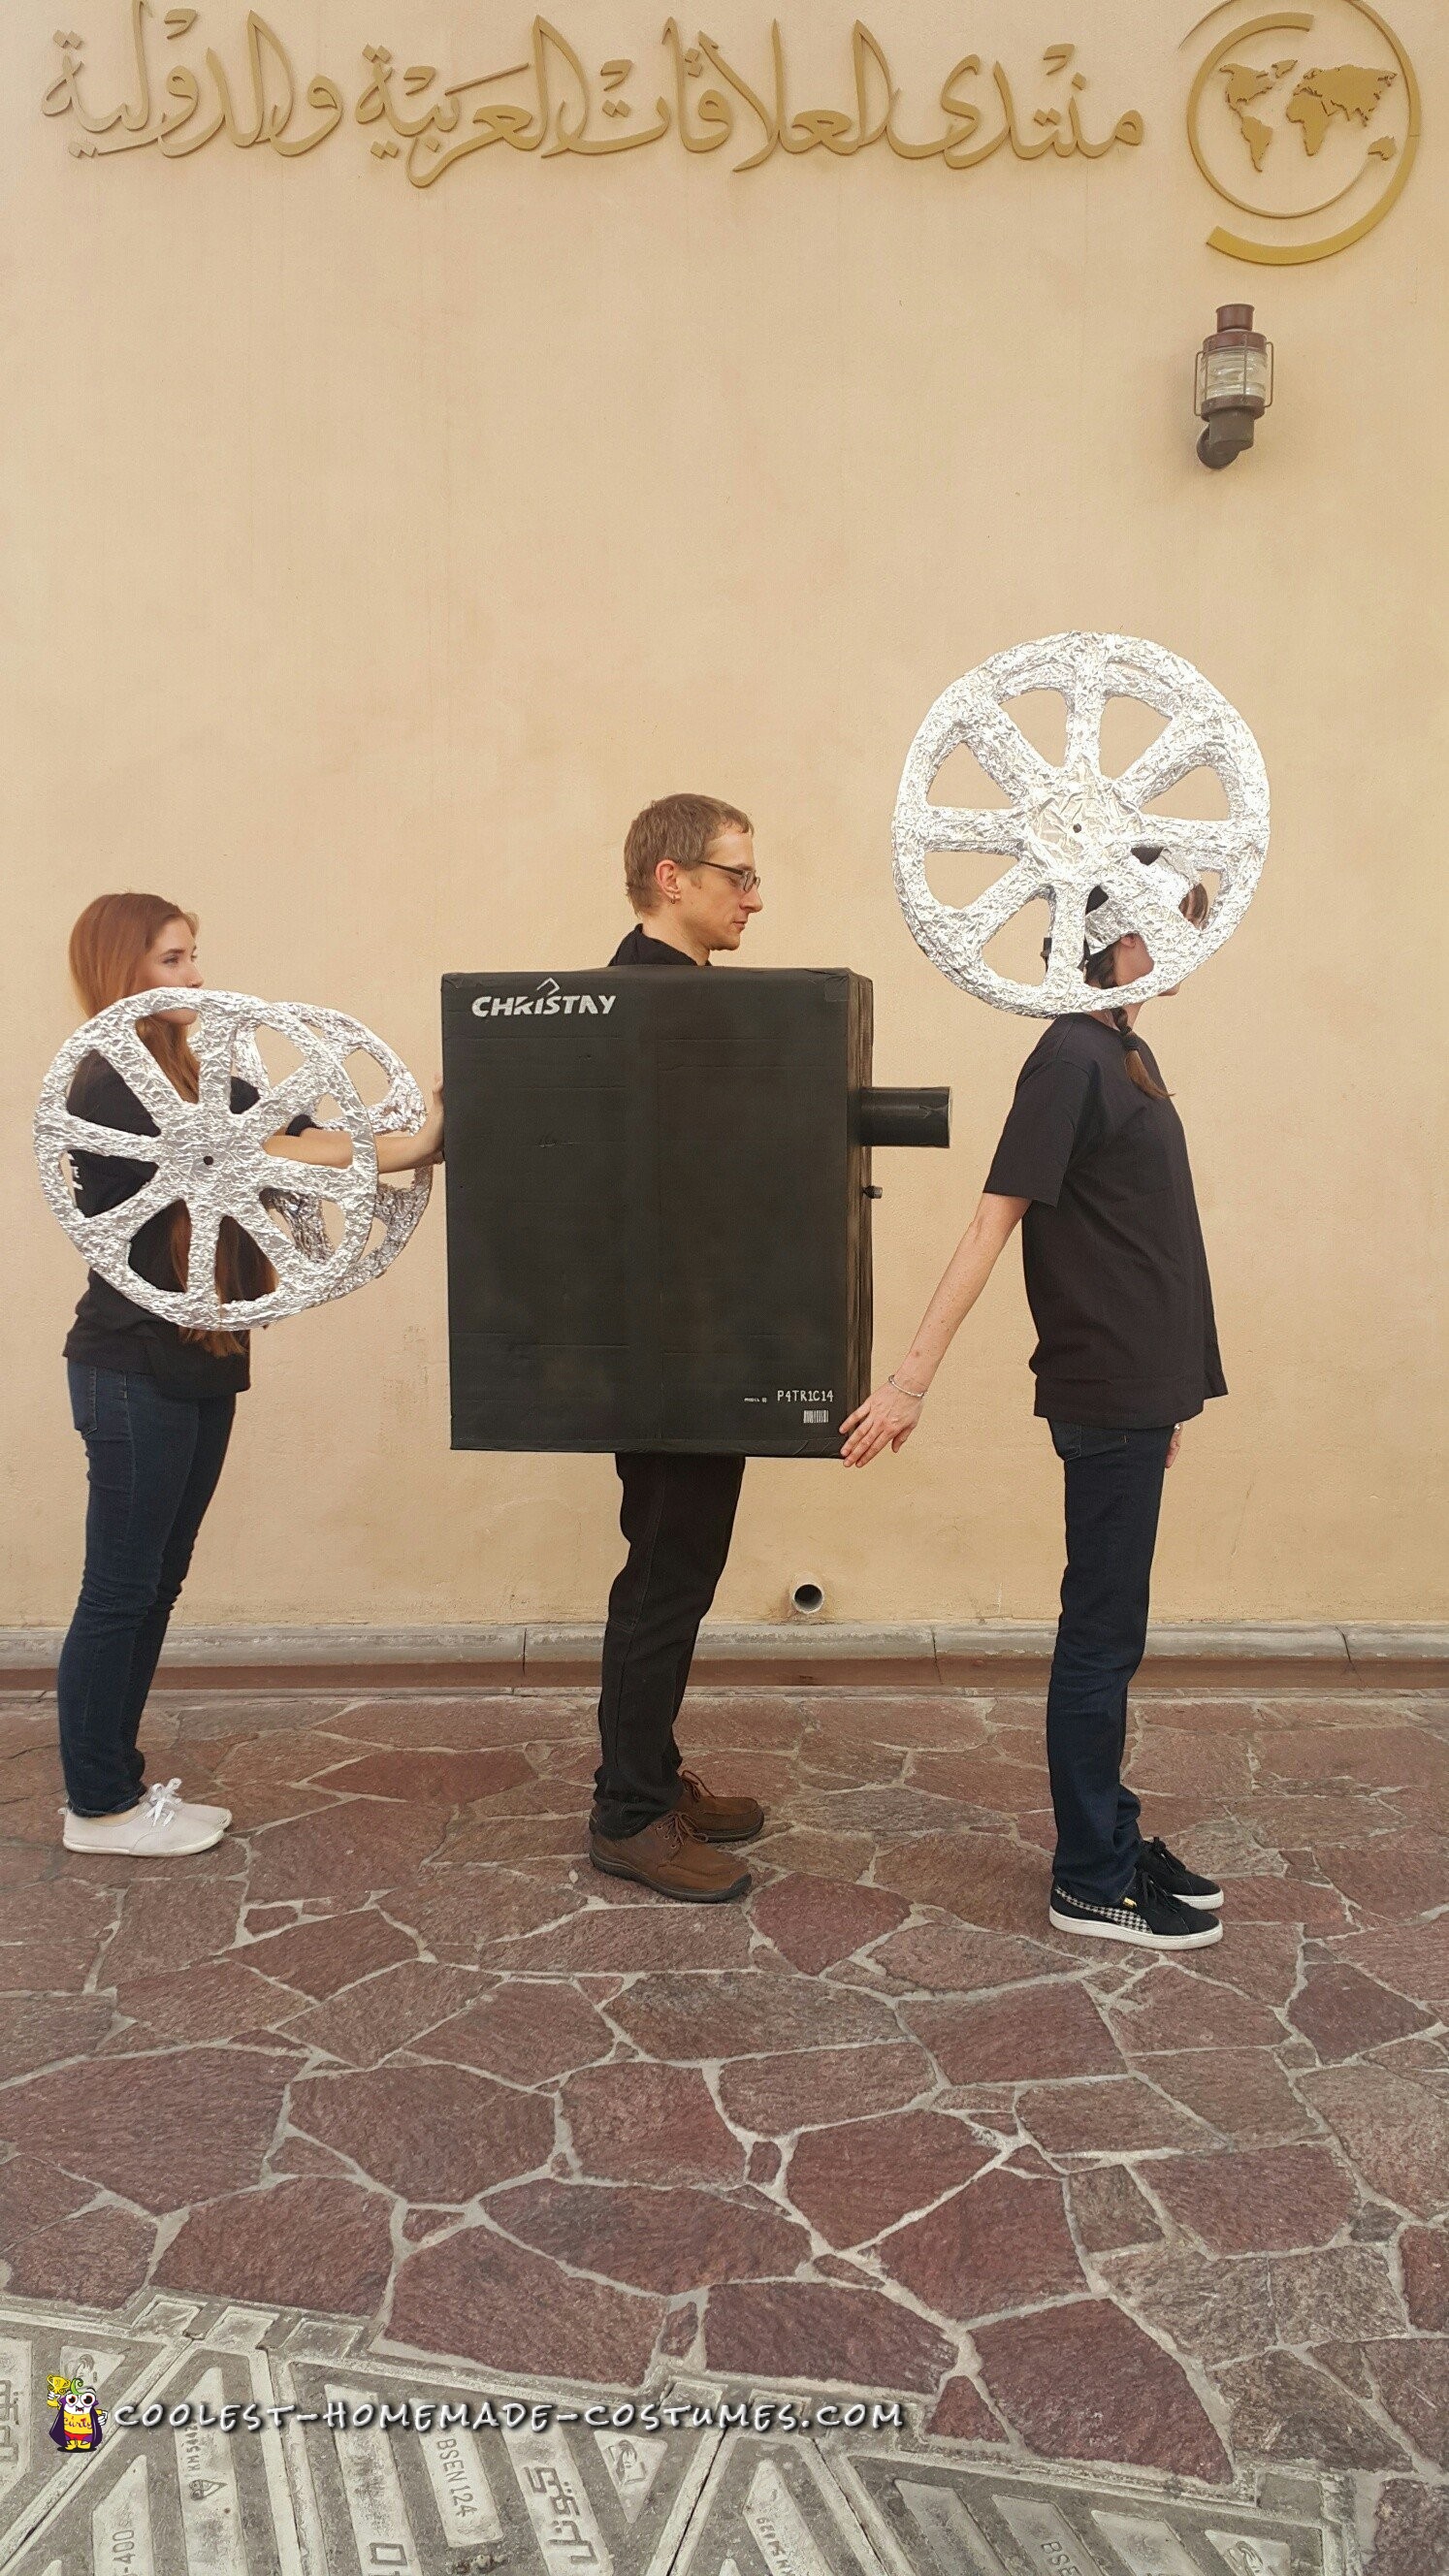 Halloween just got REEL - Projectionist Movie Camera and Reel Group Costume